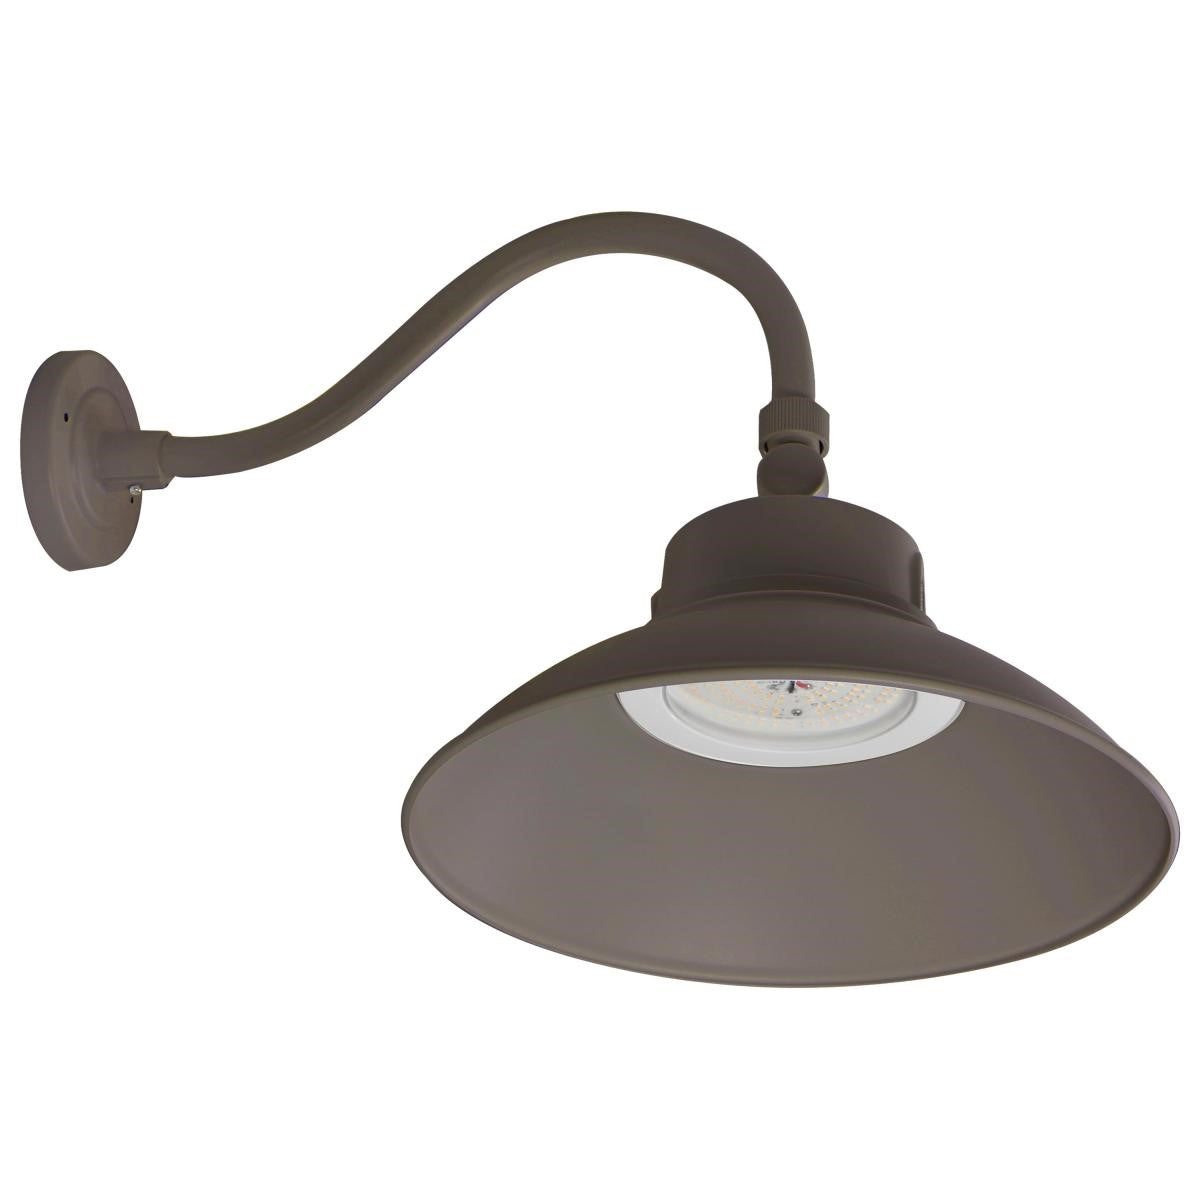 Gooseneck LED light fixture with curved arm and swivel head for customizable lighting. Rustic style, integrated with modern LED technology. Perfect for indoor or outdoor use. Provides up to 5500 lumens of CCT selectable white light. High-quality aluminum housing with powder coat finish. 30W, 40W, or 50W options. 120-277V input voltage. 3000K, 4000K, or 5000K color temperature. 80 CRI. Non-dimmable. Wet location safety rating. Dimensions: 14.17"W x 14.96"H x 23.23"E. 5-year warranty.